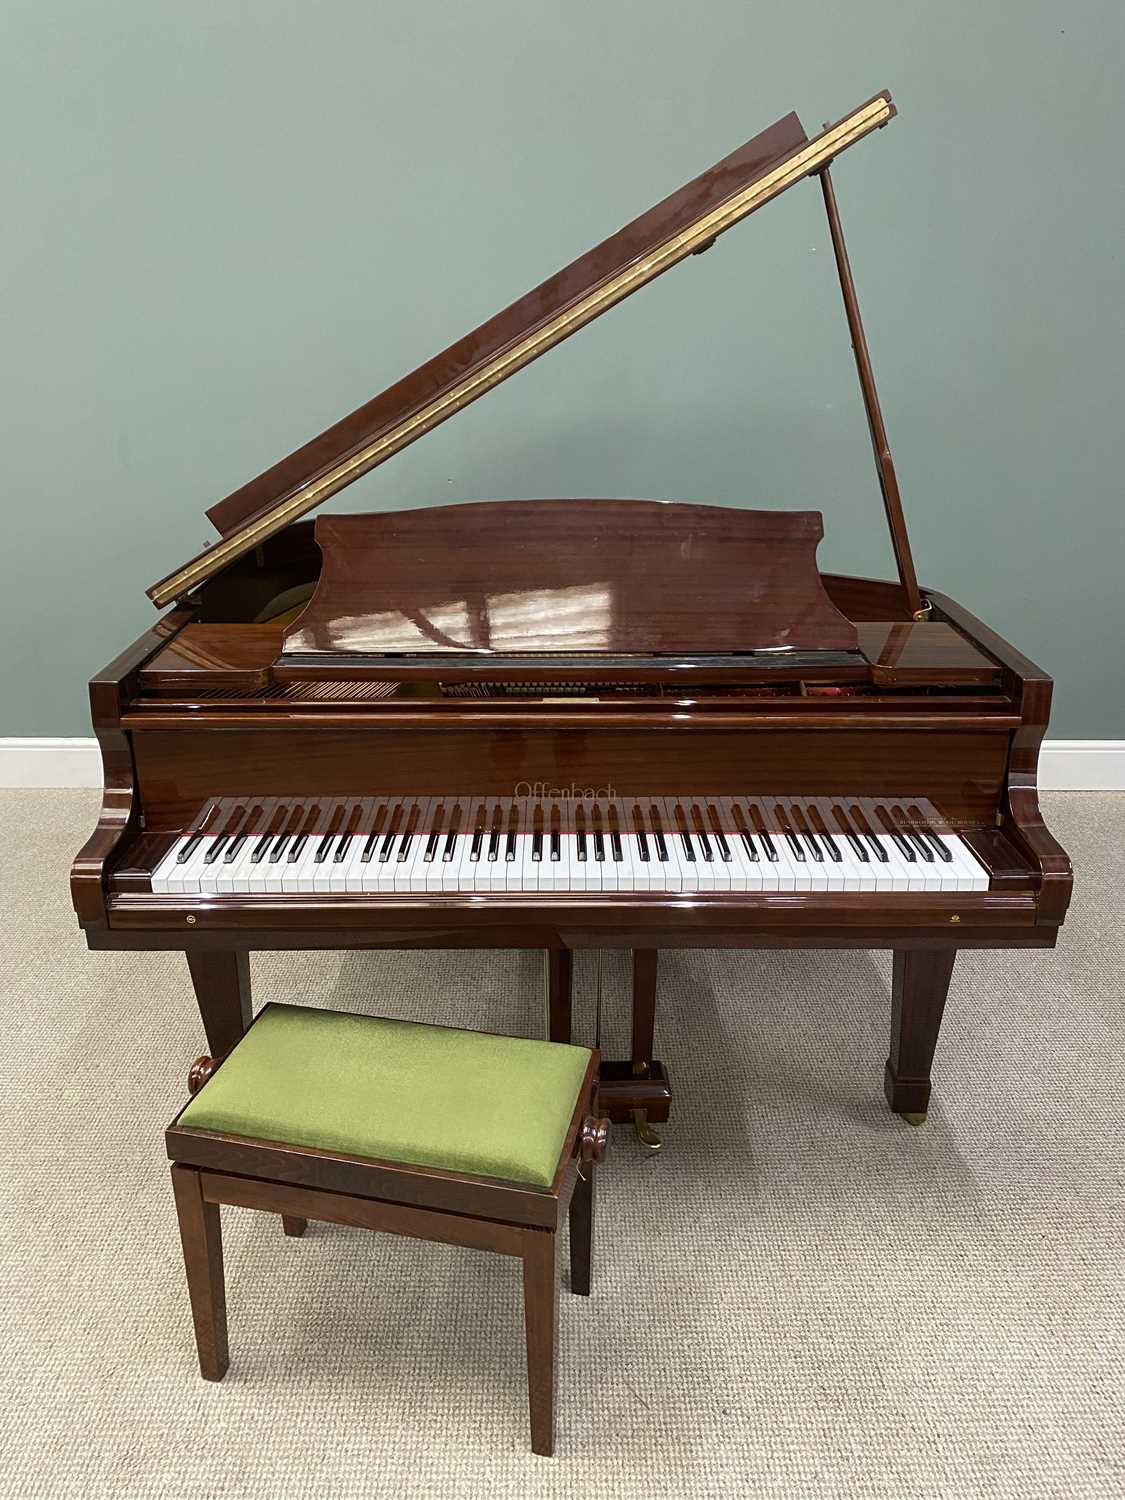 OFFENBACH MAHOGANY BABY GRAND PIANO WITH RISE & FALL PIANO STOOL, 101cms H, 148cms W, 155cms approx.